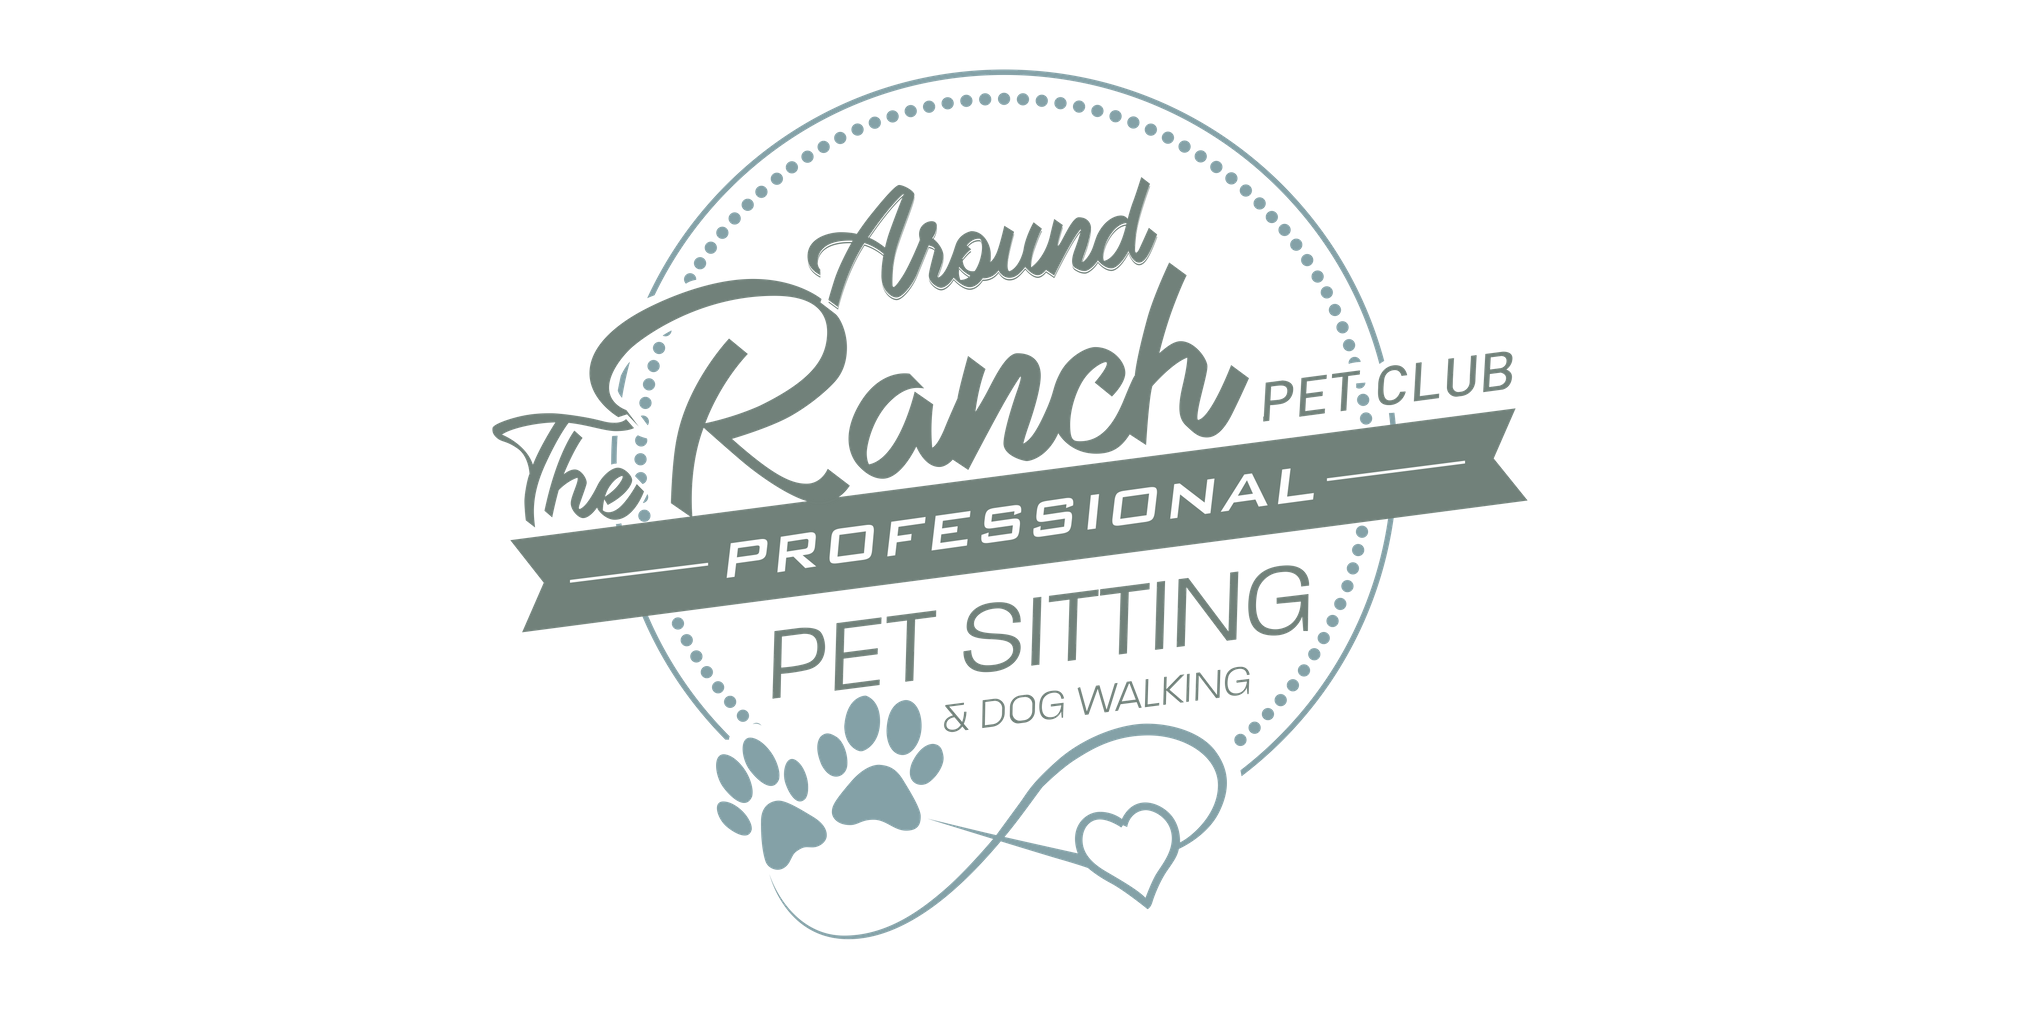 around-the-ranch-pet-club-logo-summary-image.png